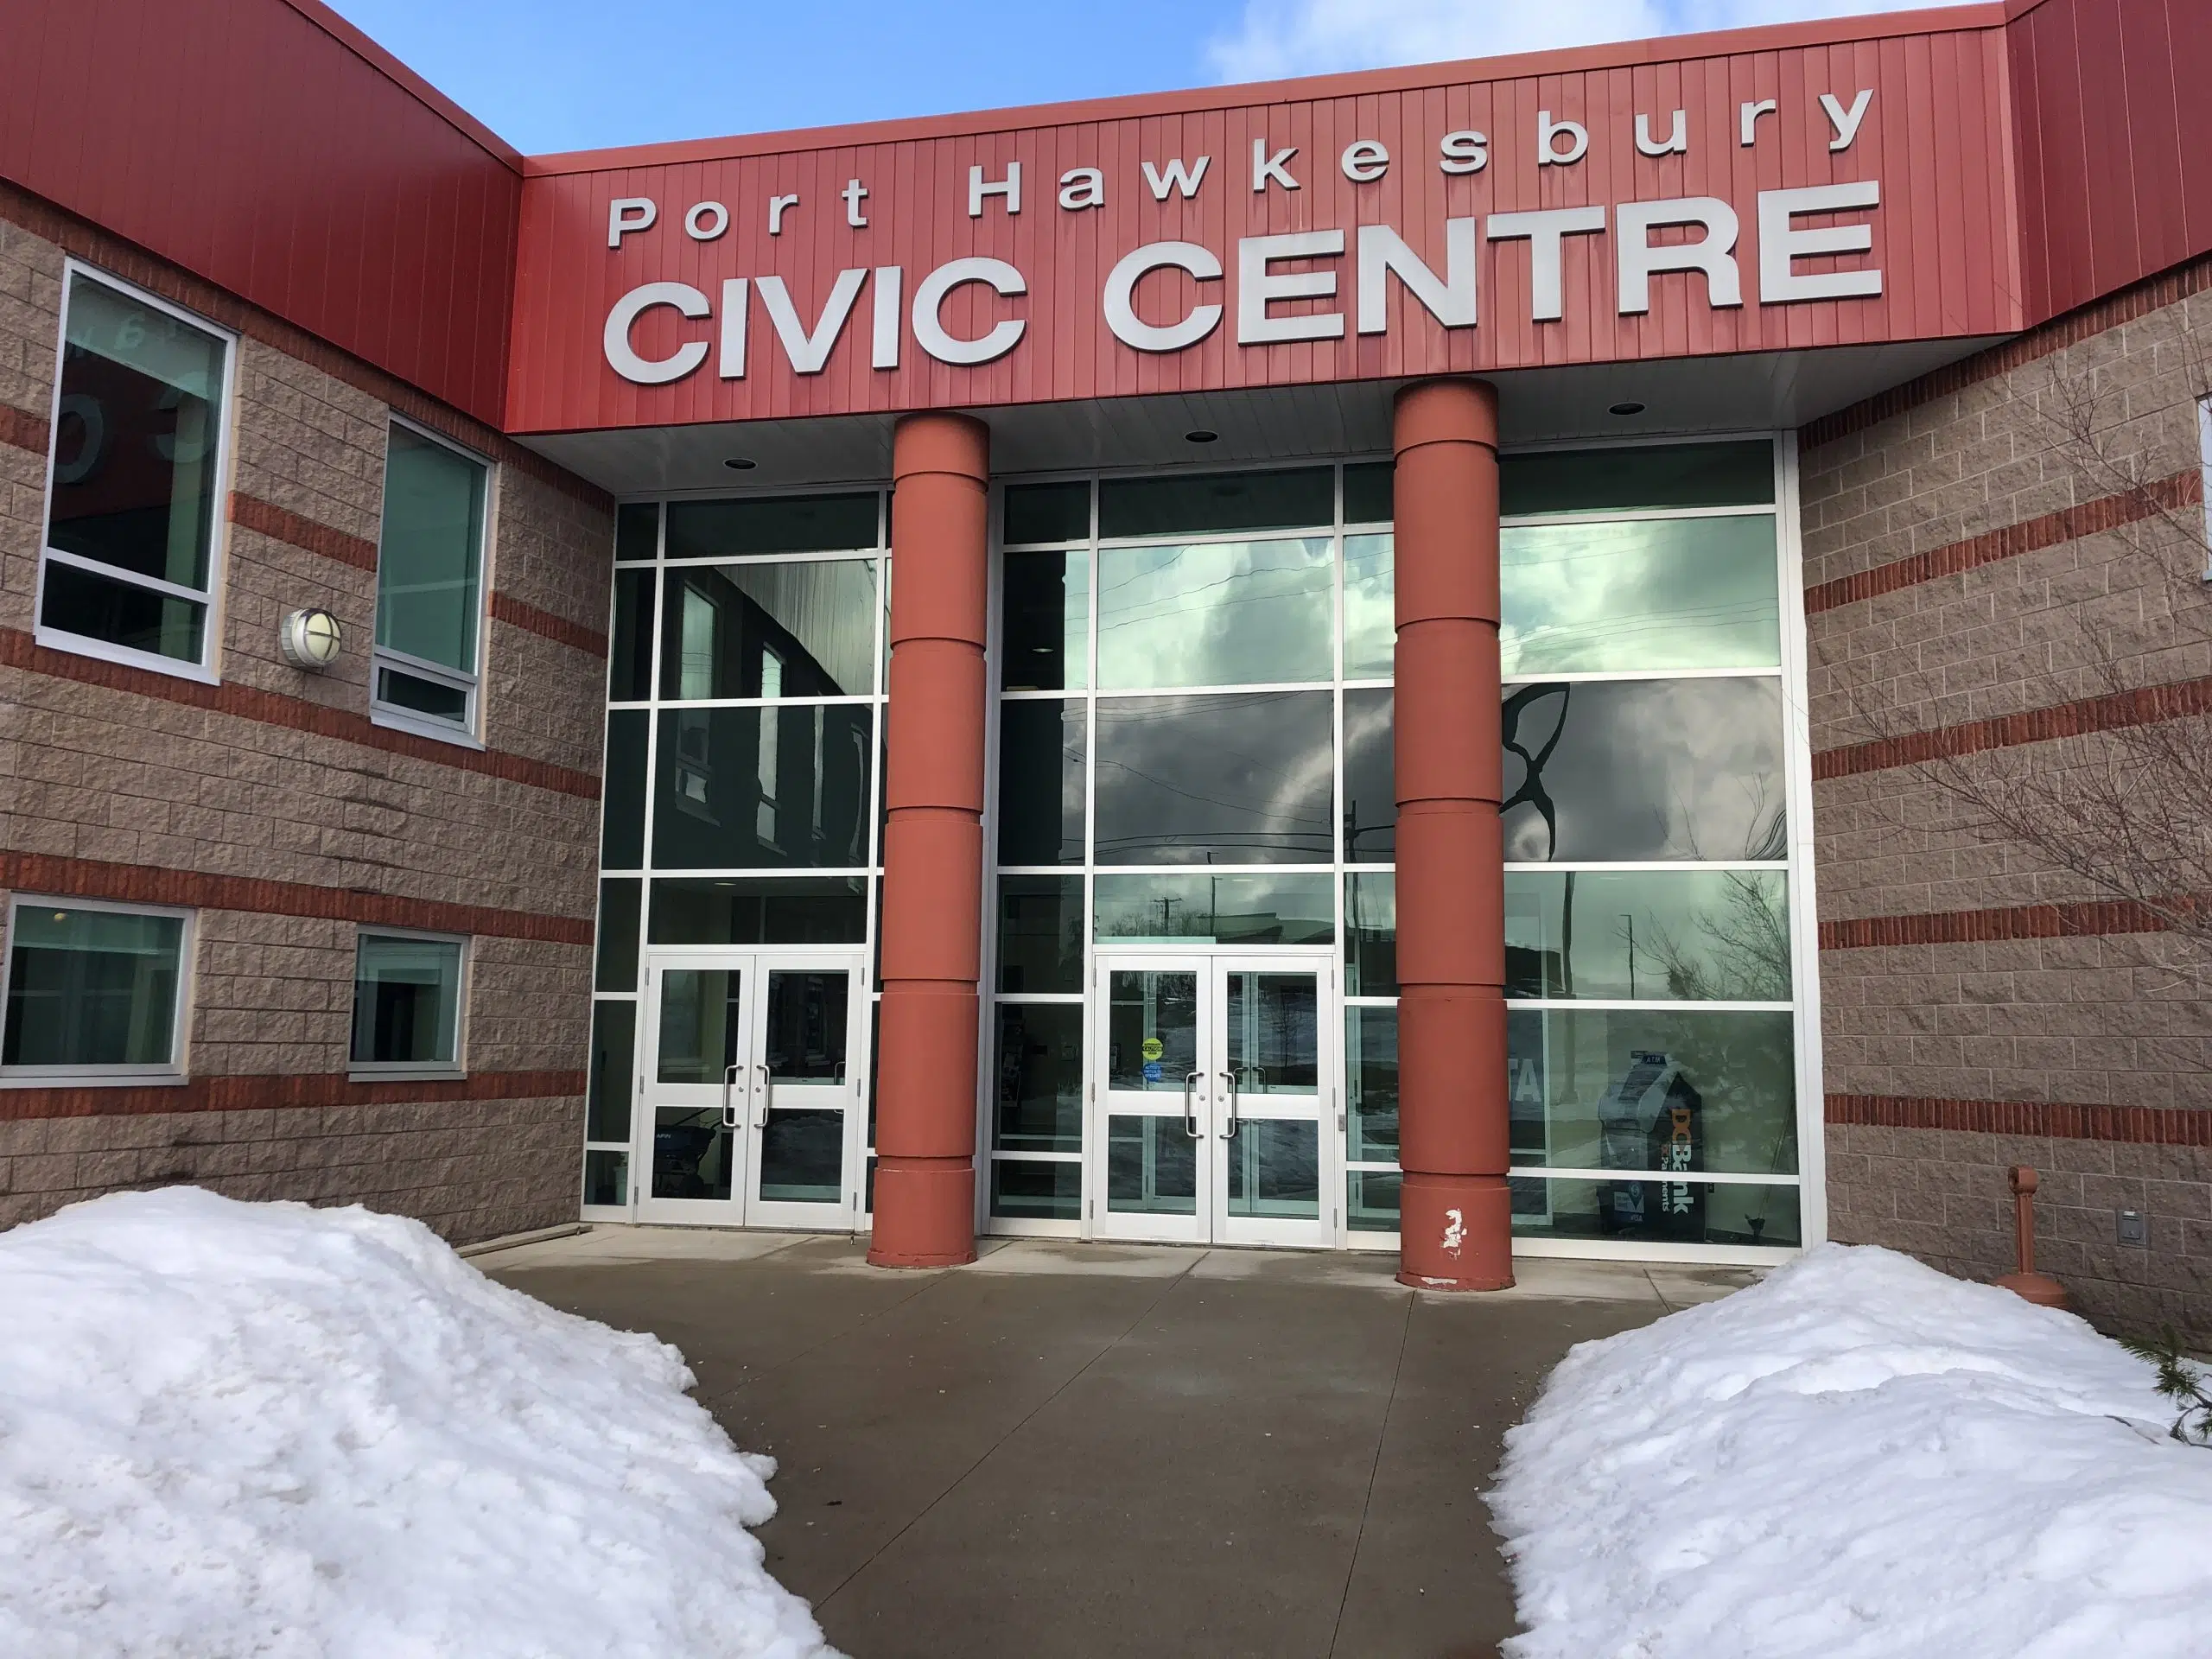 Port Hawkesbury Recreation Impacted by COVID-19 Restrictions